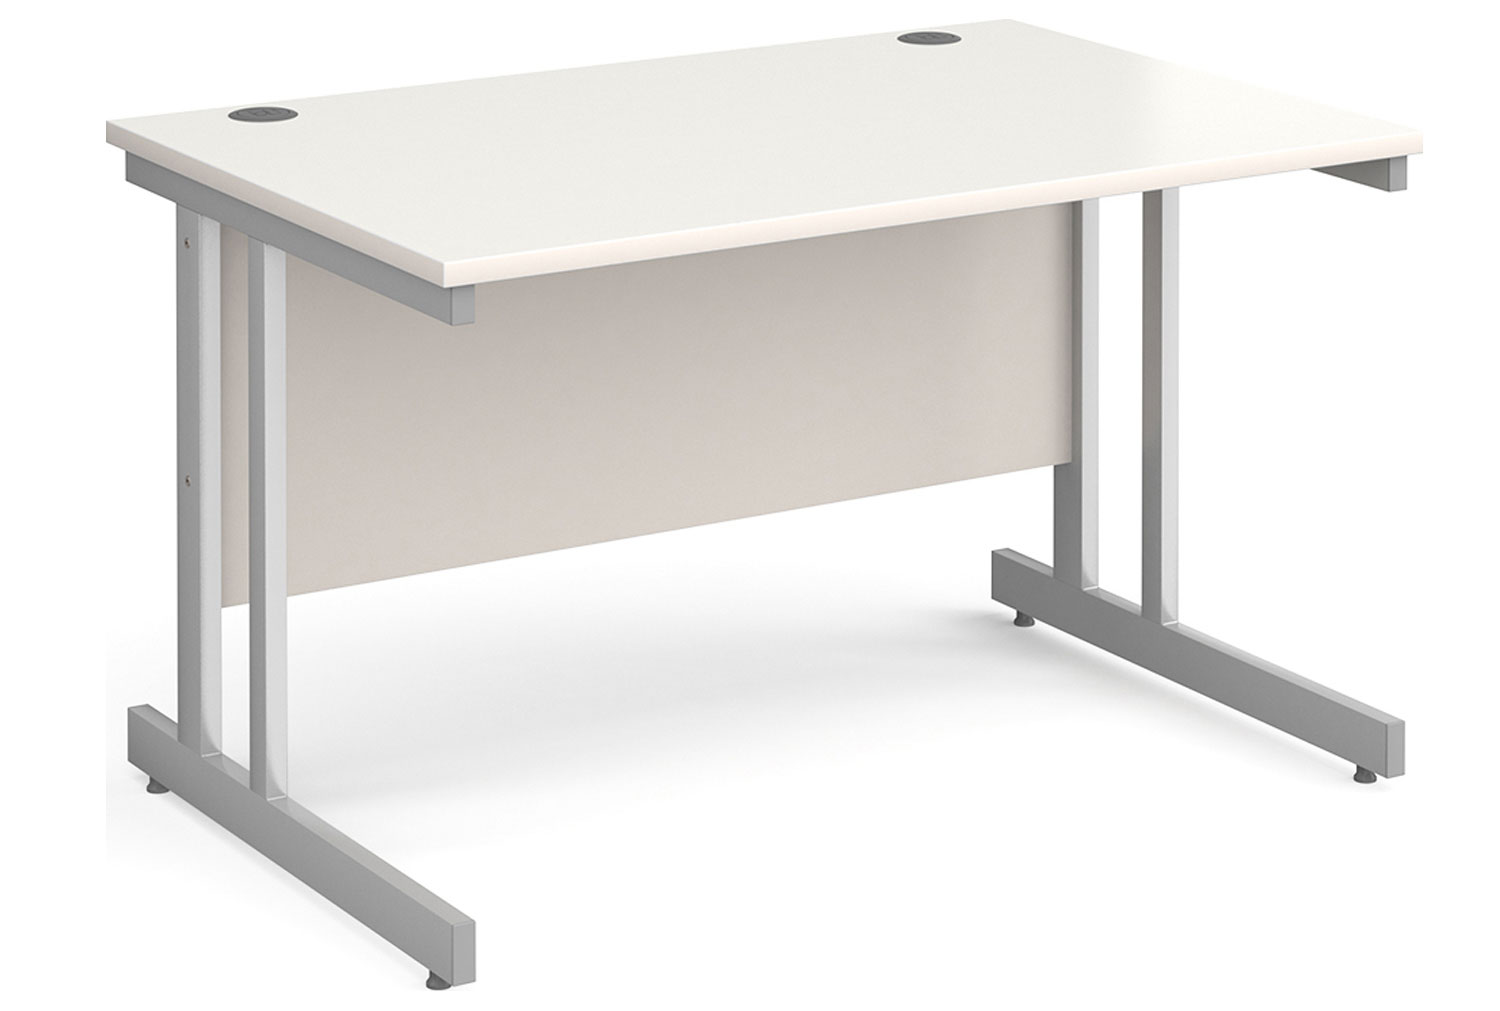 All White Double C-Leg Rectangular Office Desk, 120wx80dx73h (cm), Express Delivery